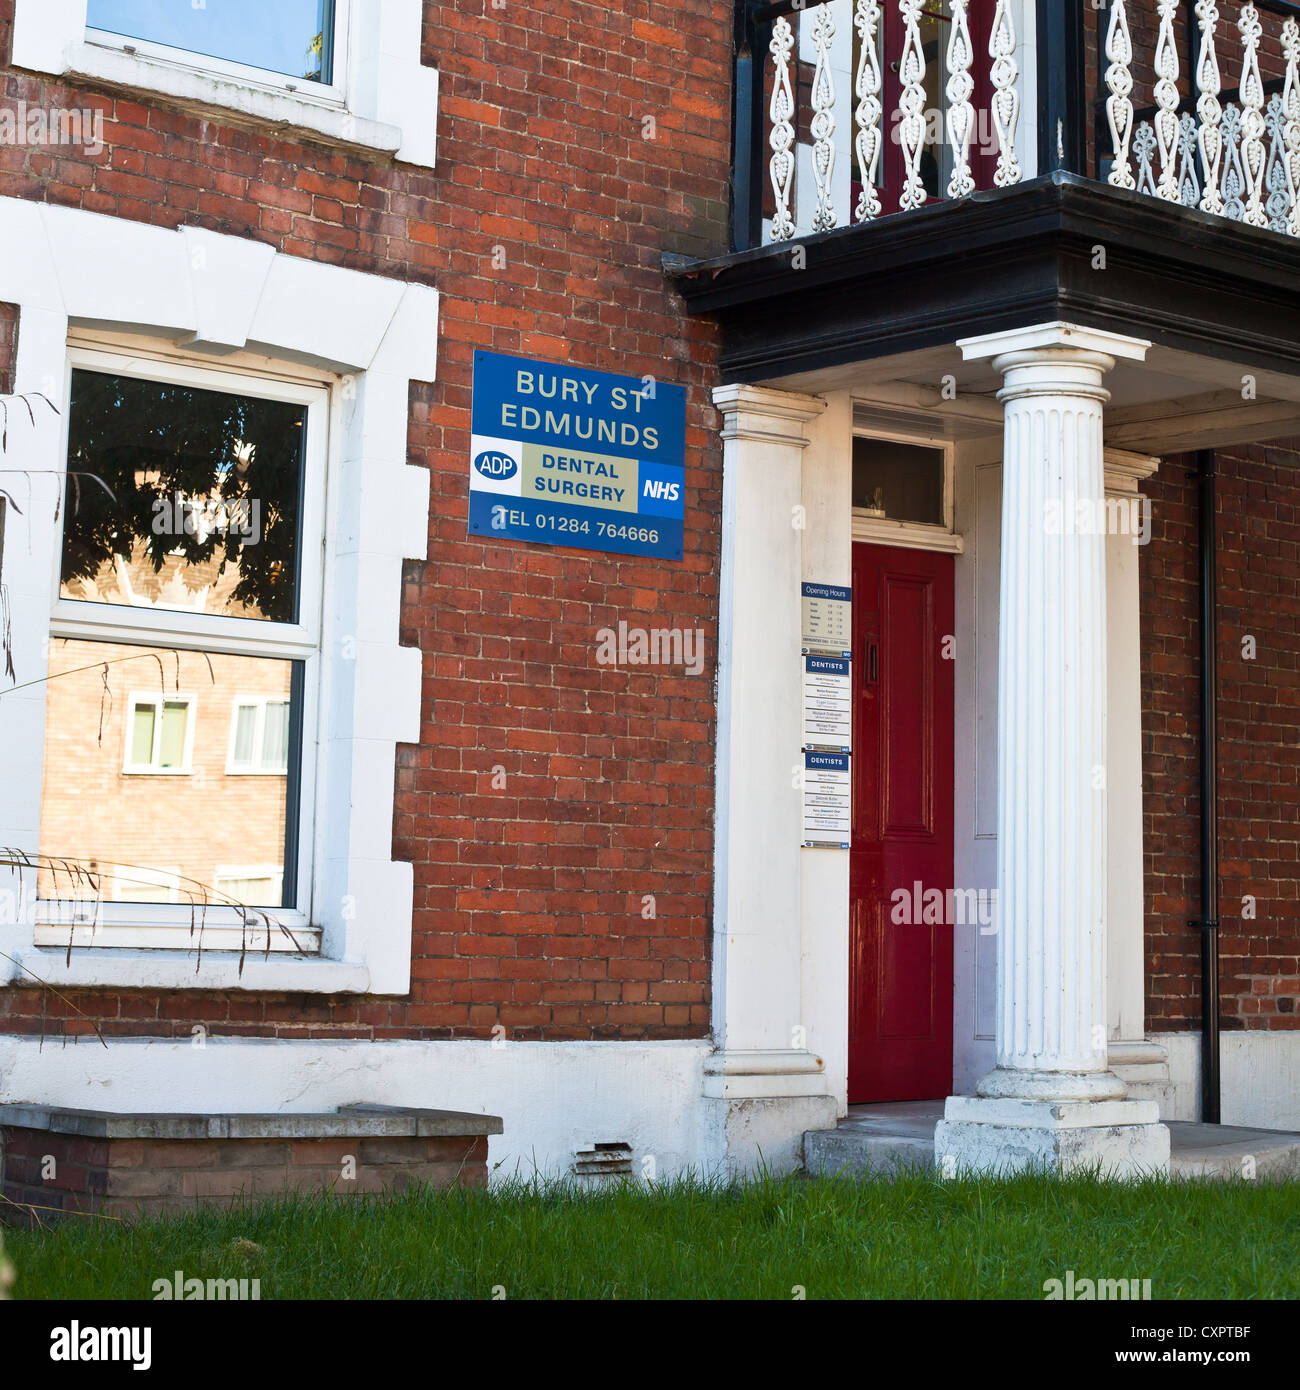 Dental surgery in Bury St Edmunds, Out Risbygate Stock Photo